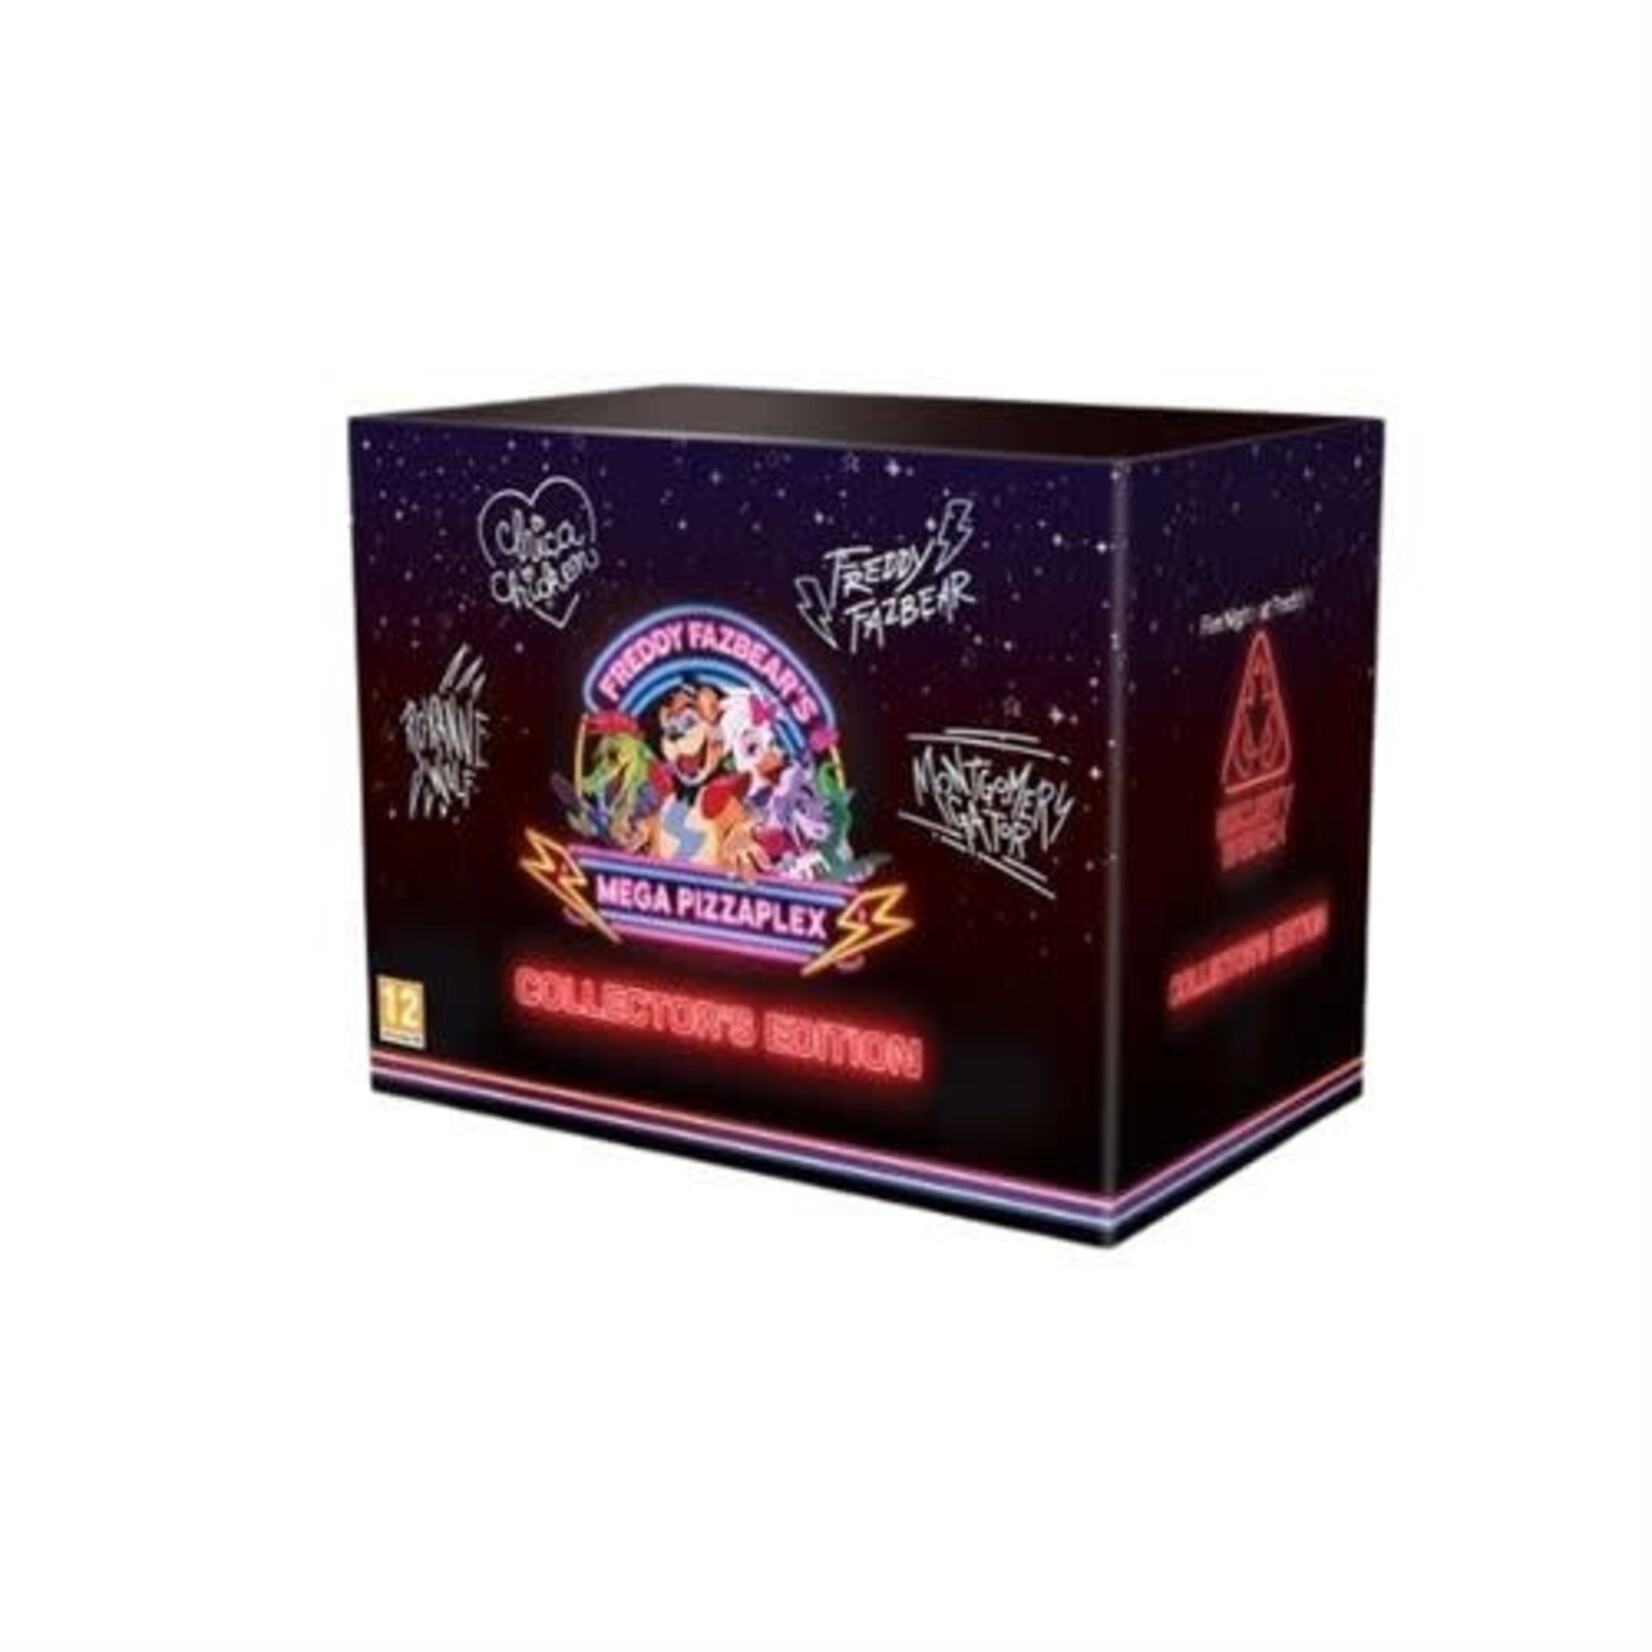 Five Nights At Freddy's: Security Breach Collector's Edition